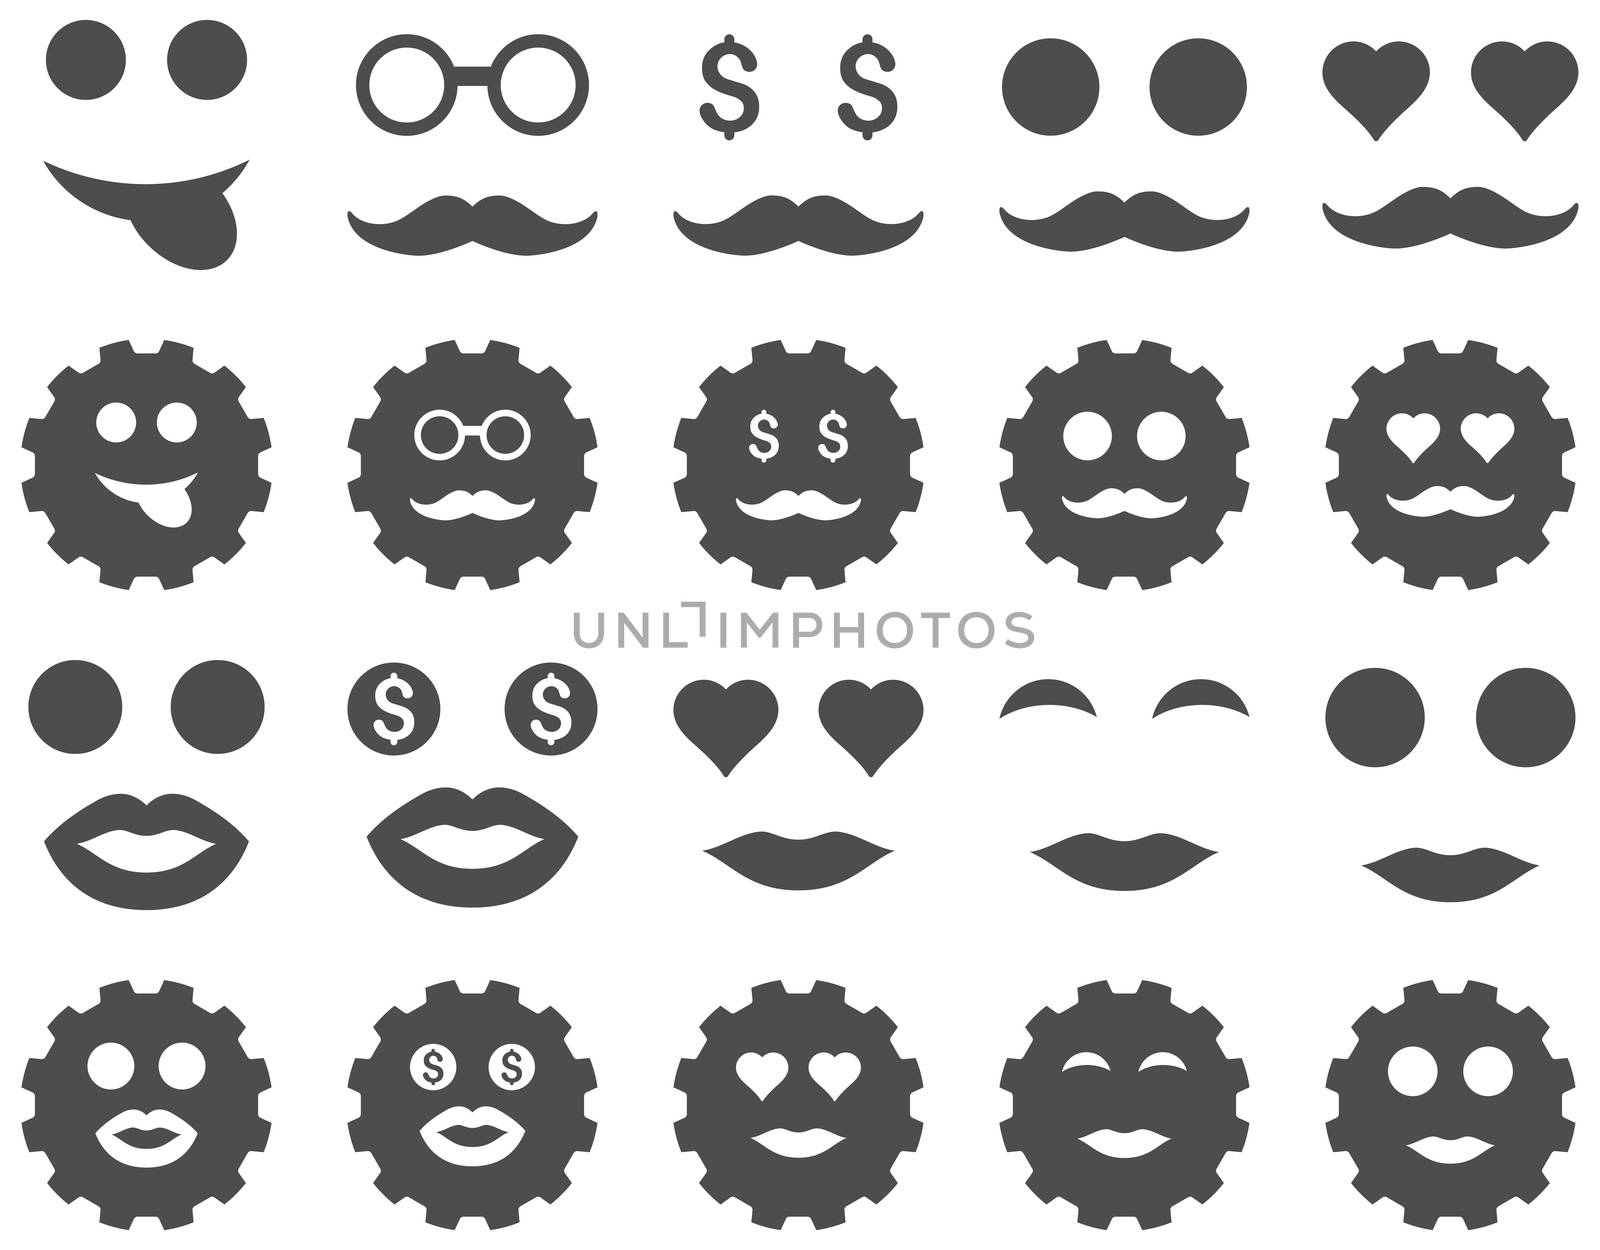 Gear and emotion icons. Glyph set style is flat images, gray symbols, isolated on a white background.